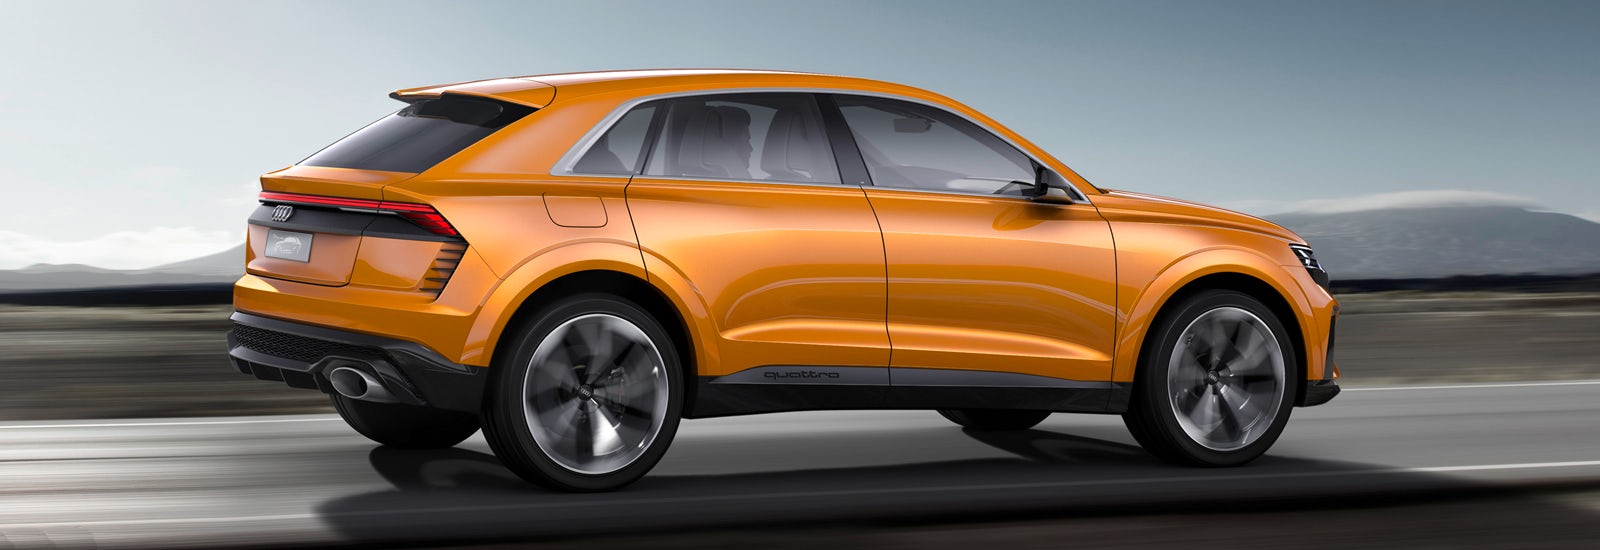 2018 Audi Q8 price, specs and release date | carwow